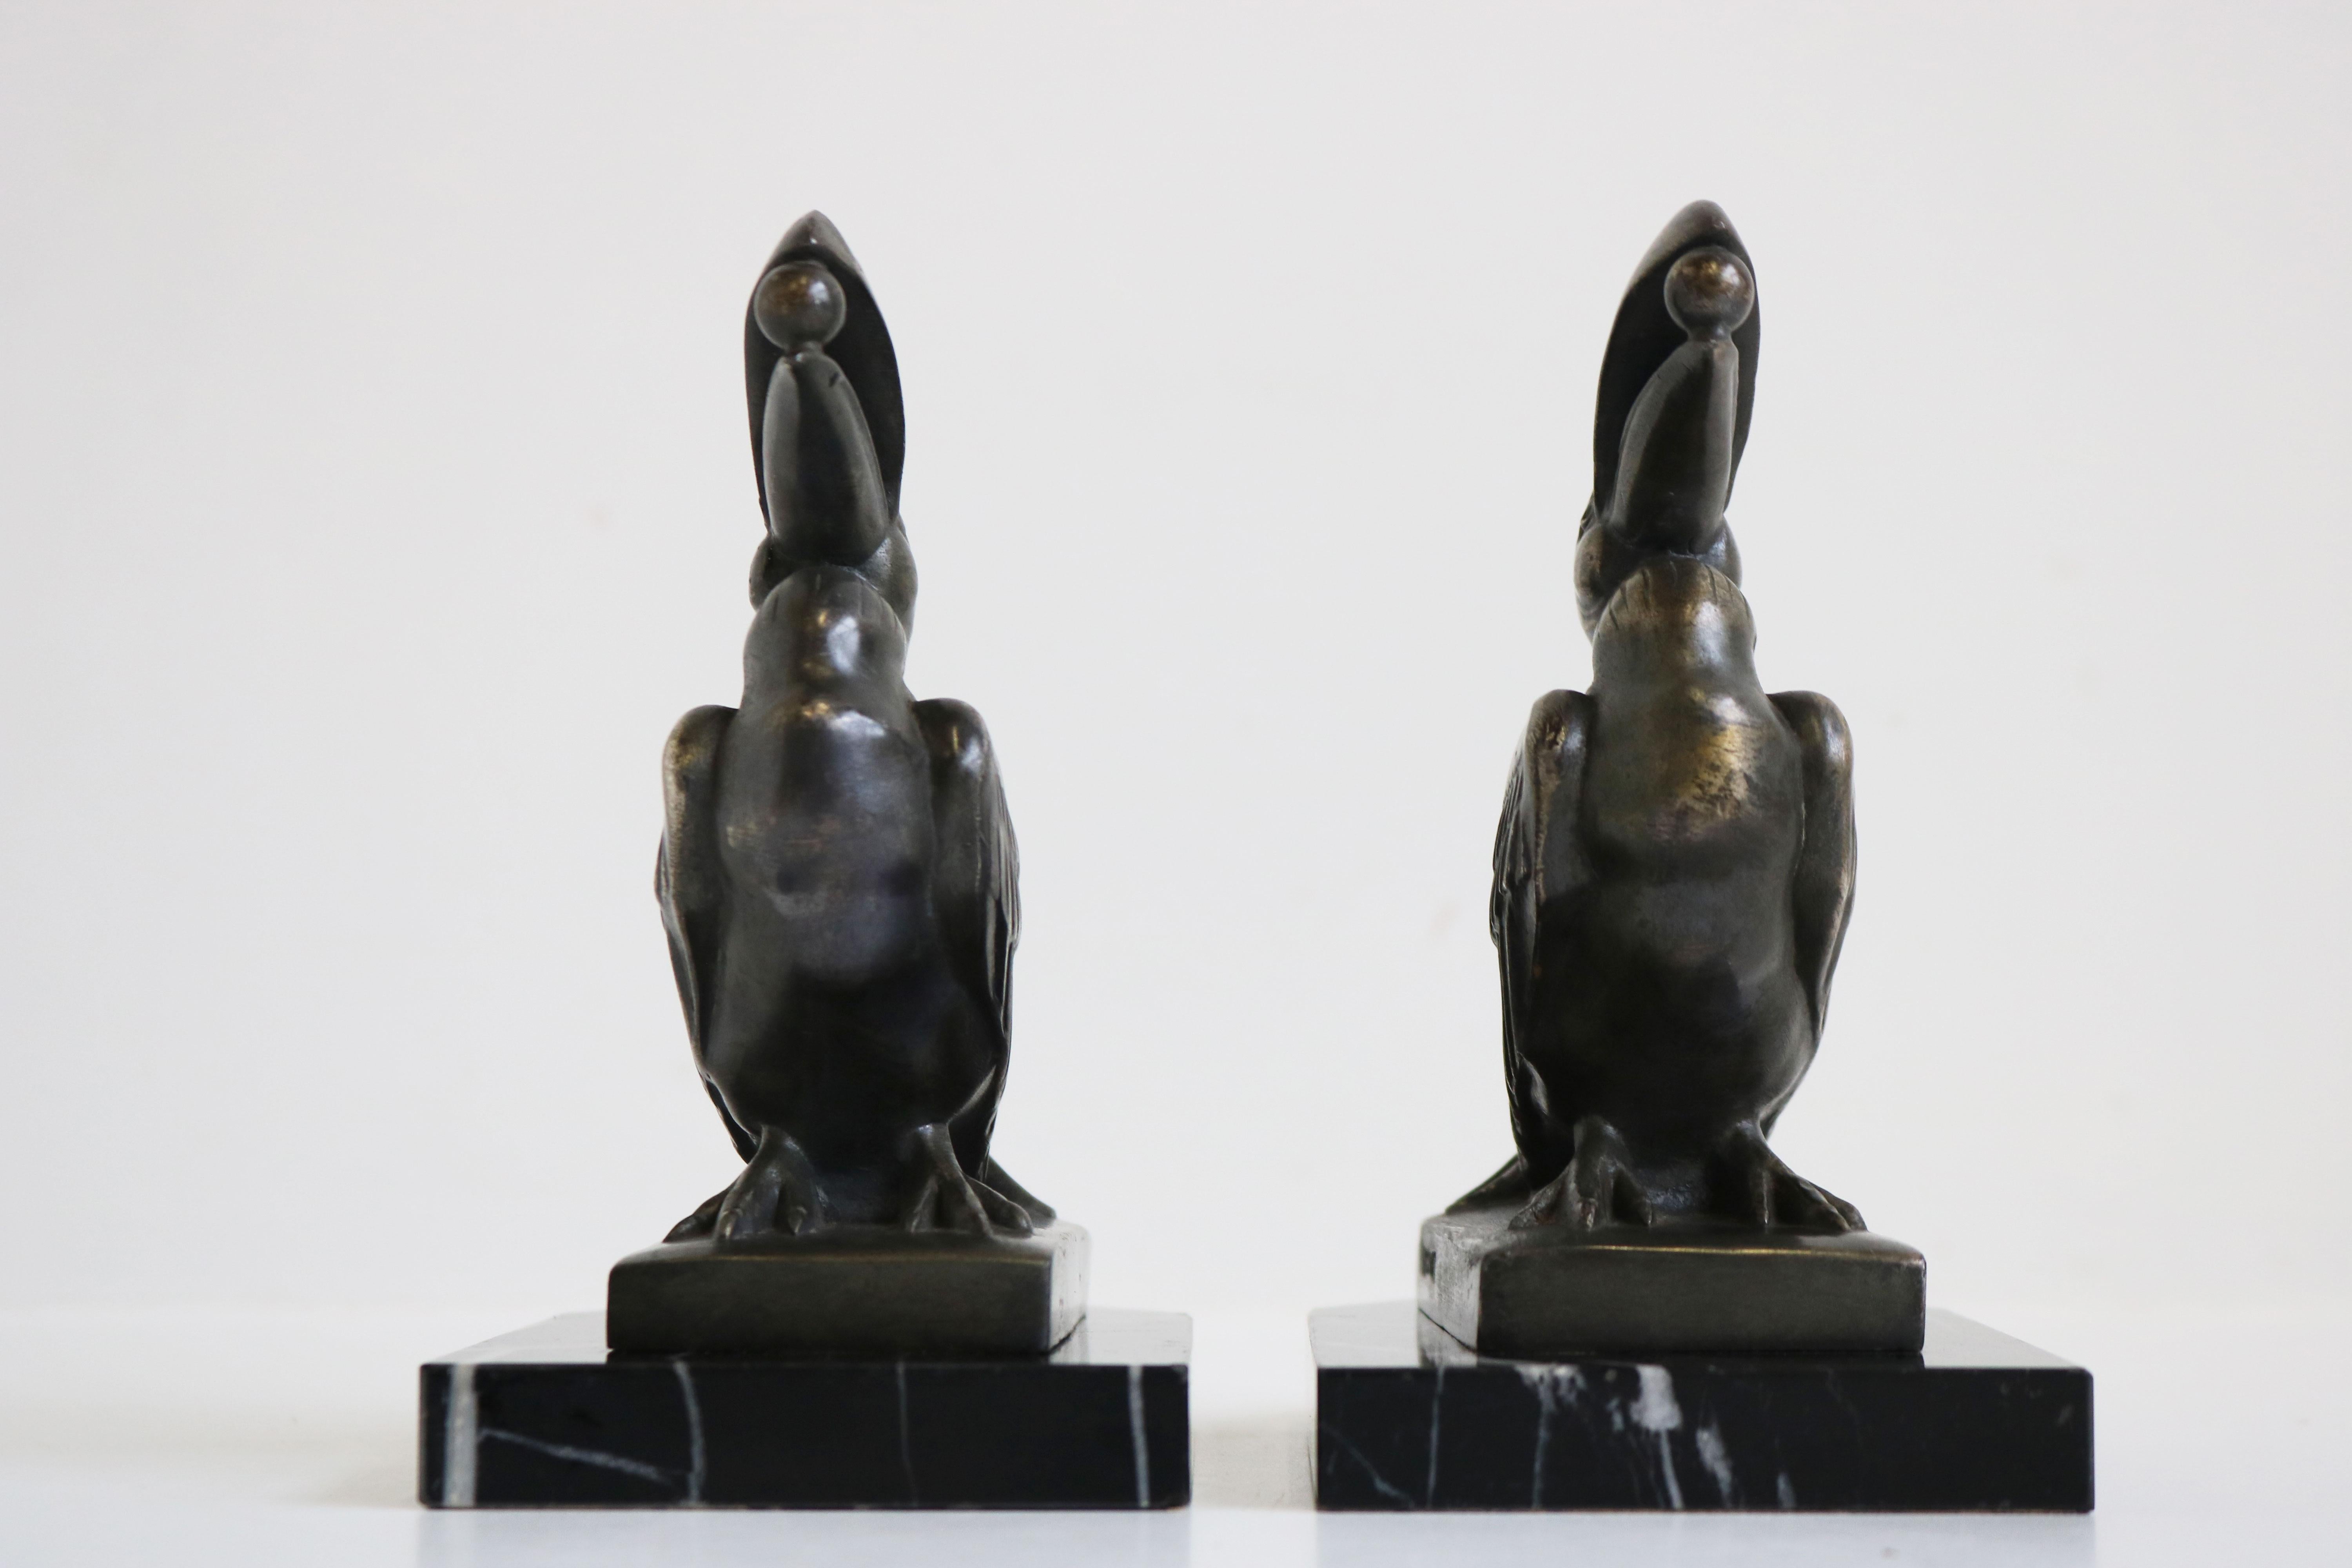 Antique French Art Deco Bookends by Maurice Frecourt 1925 Toucan Black Marble For Sale 5